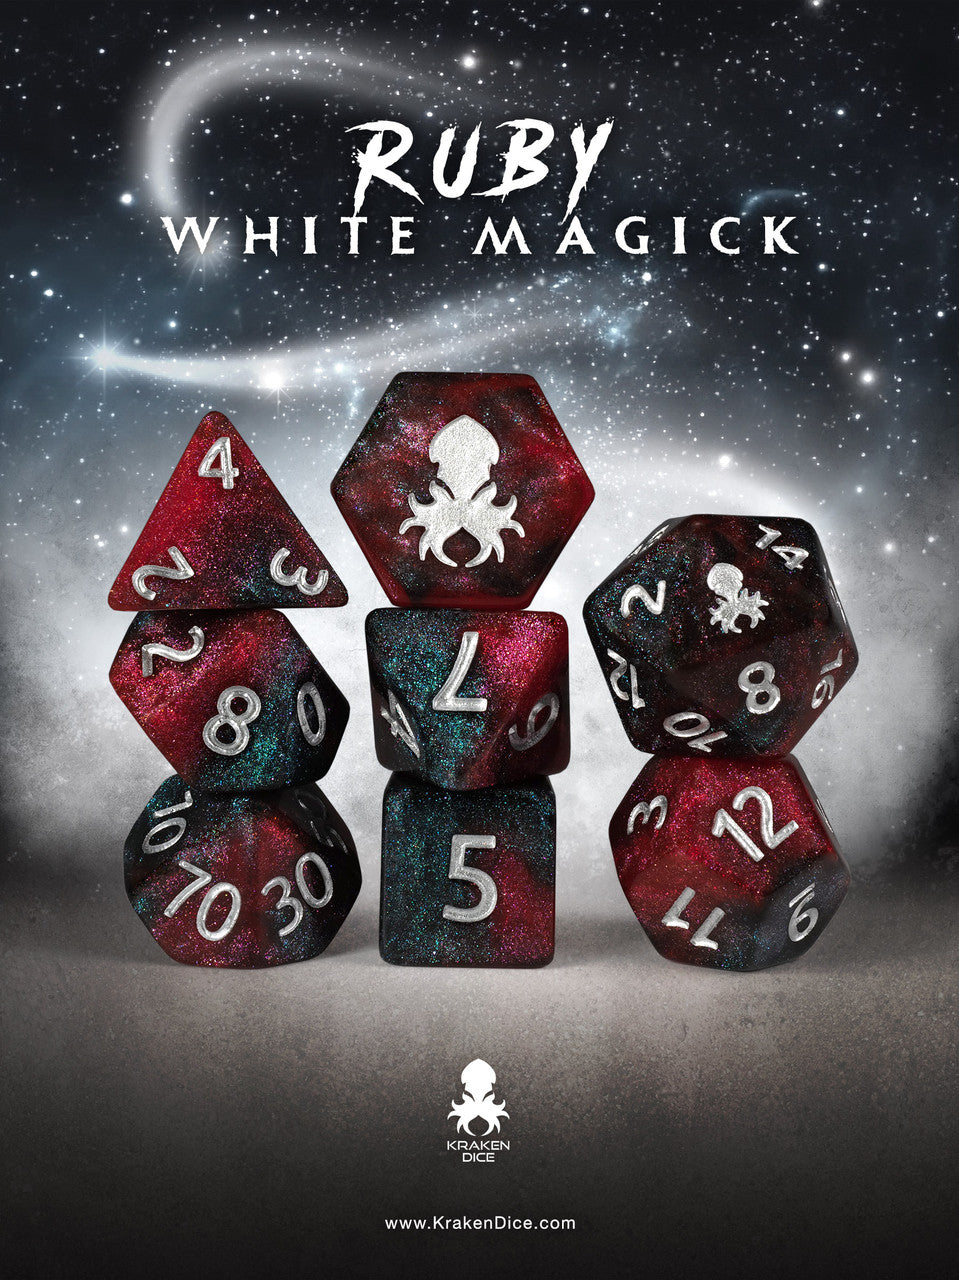 Ruby White Magick 8pc Dice Set inked in Silver